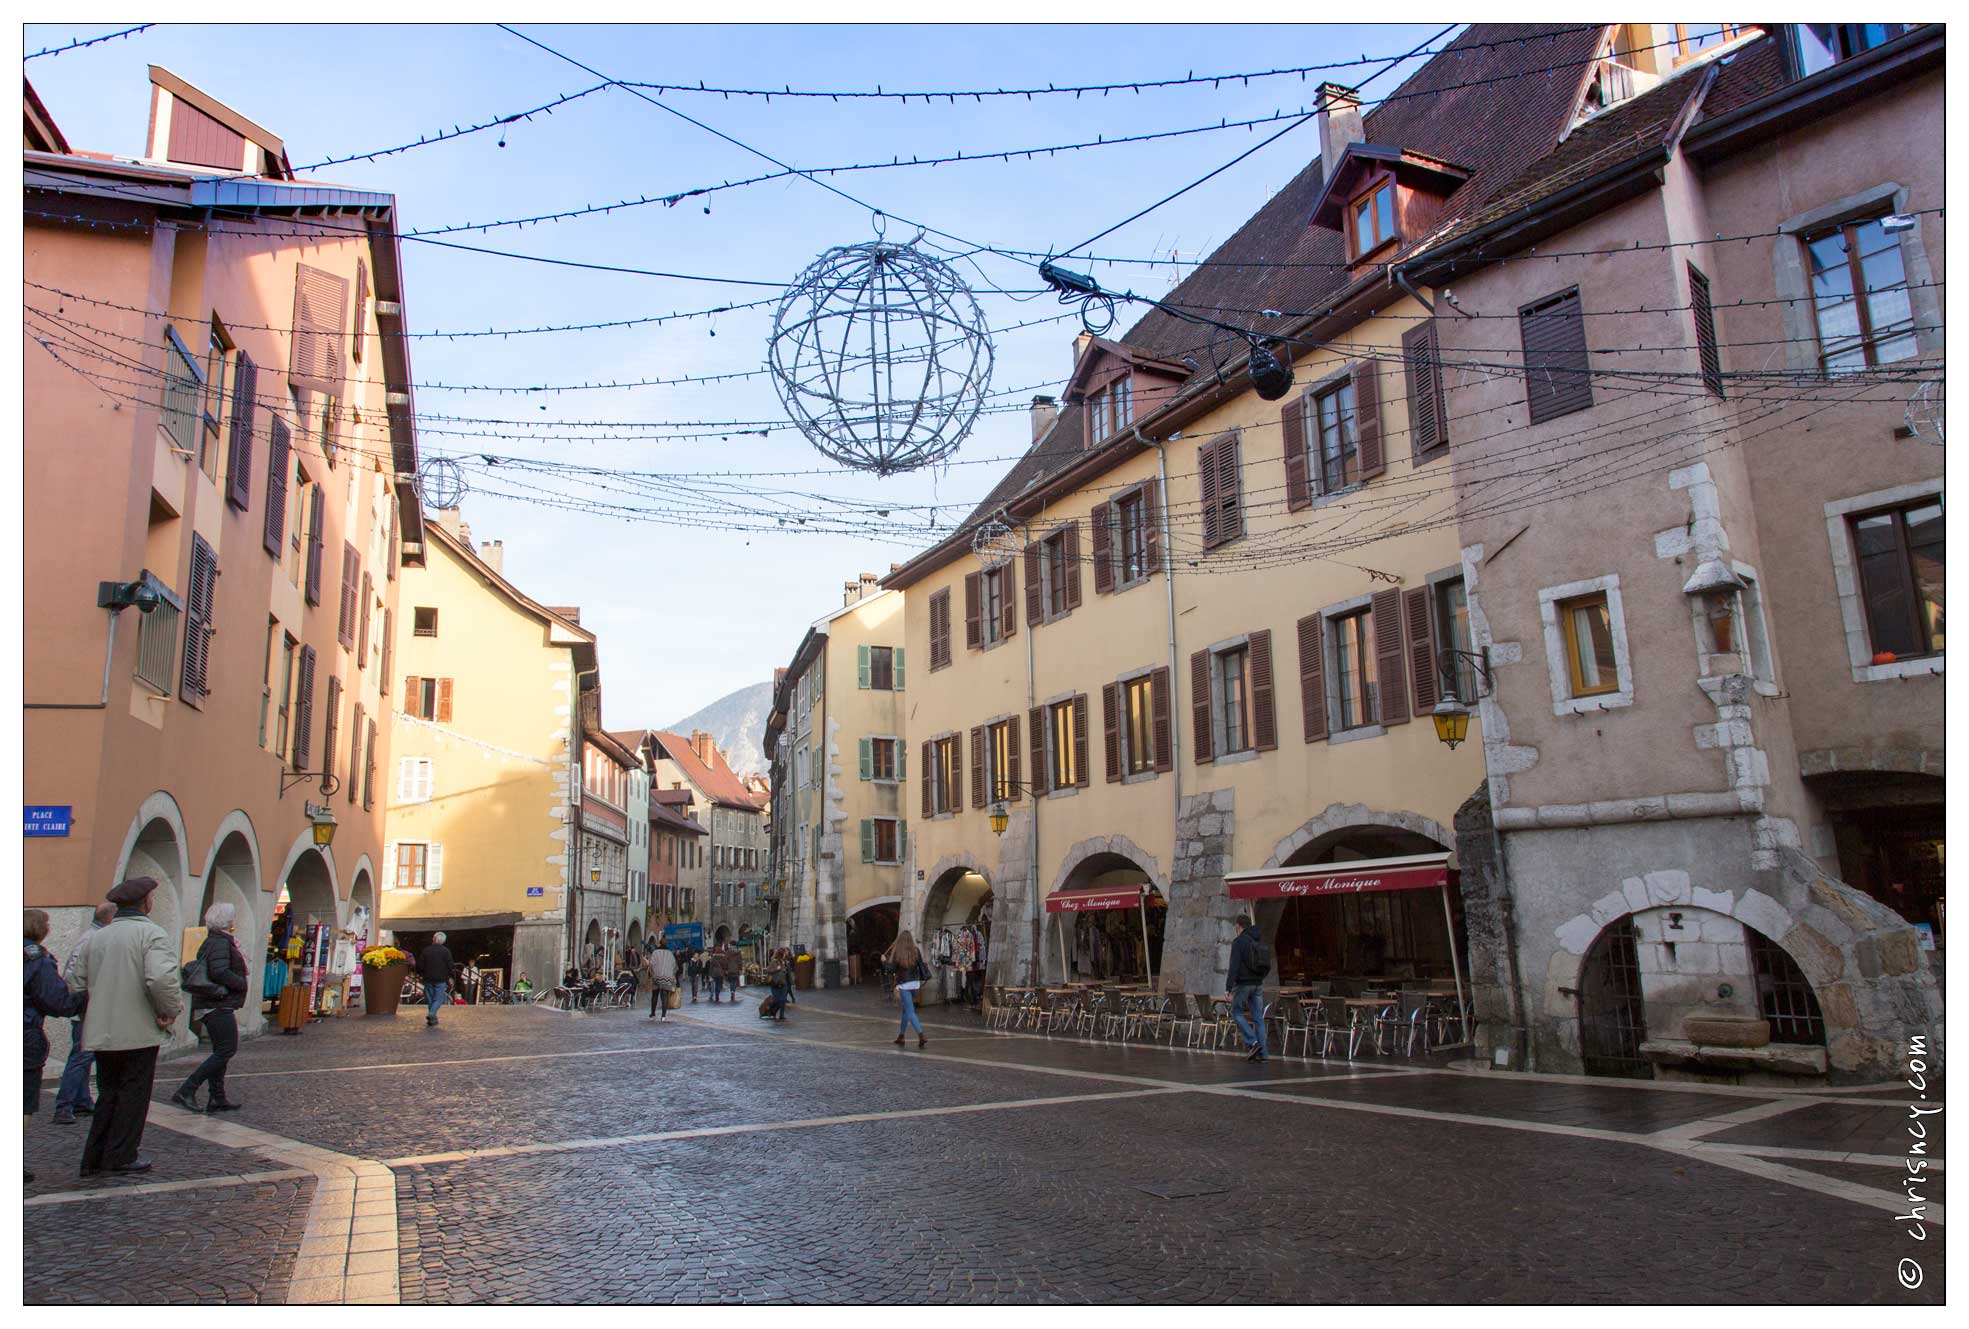 20151113-61_4720-Annecy_Place_Georges_Volland.jpg